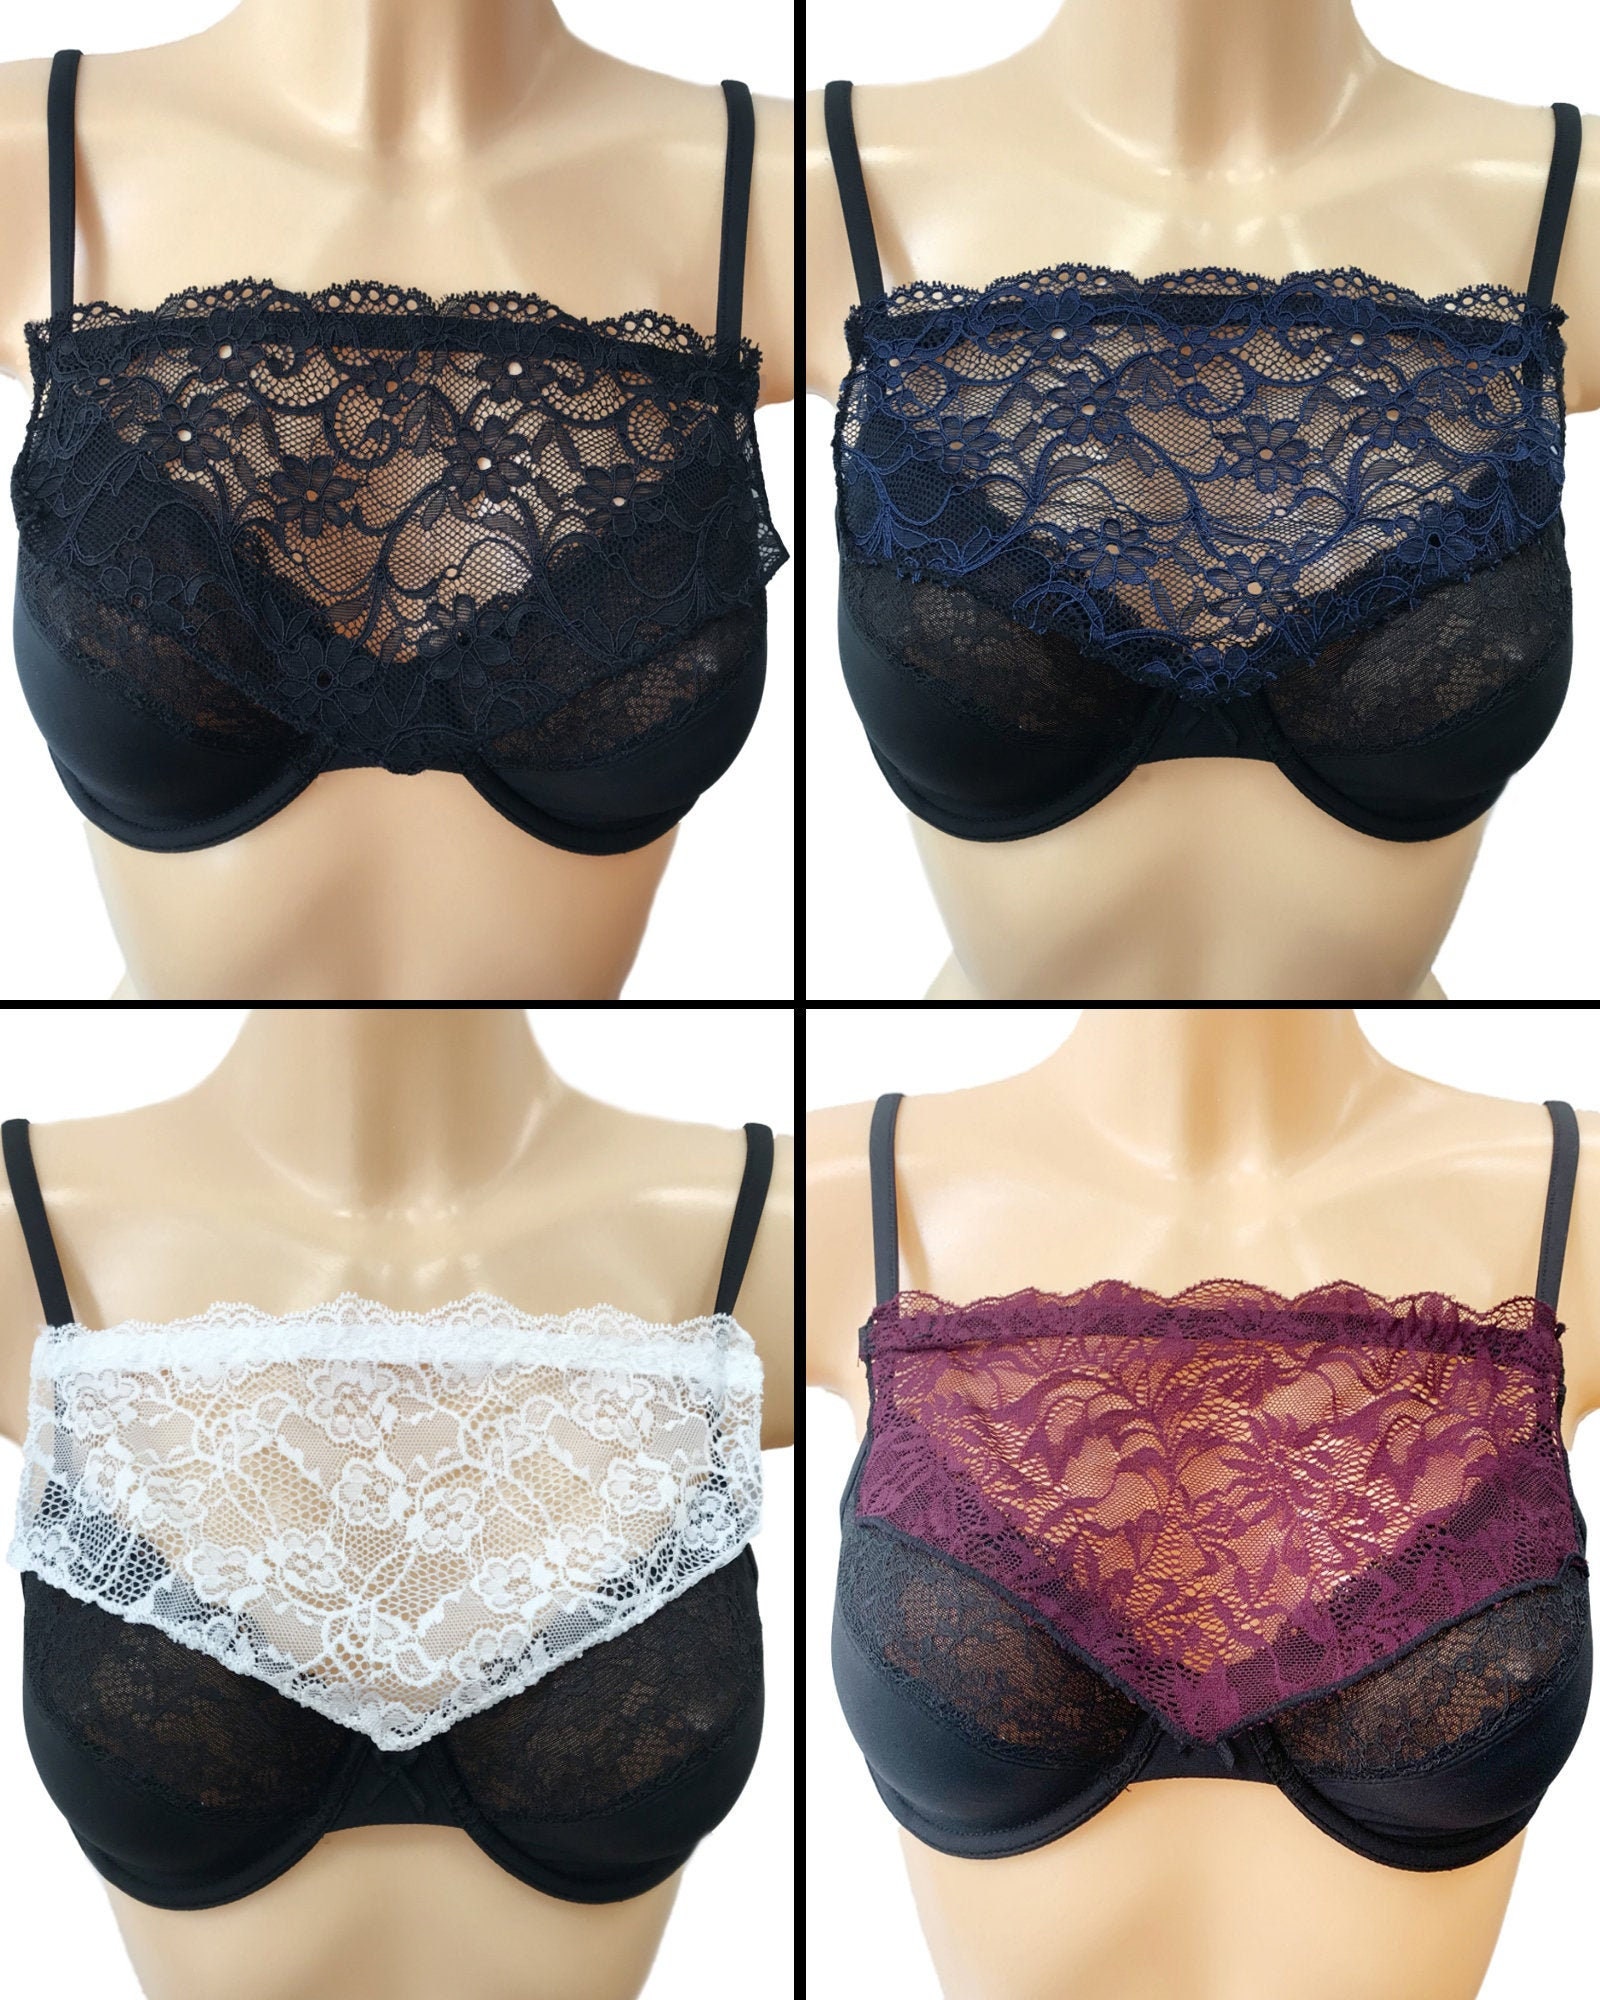 Modesty Panel Lace Bra Insert Instant Camisole Cleavage Cover Black Navy  White Purple -  Australia